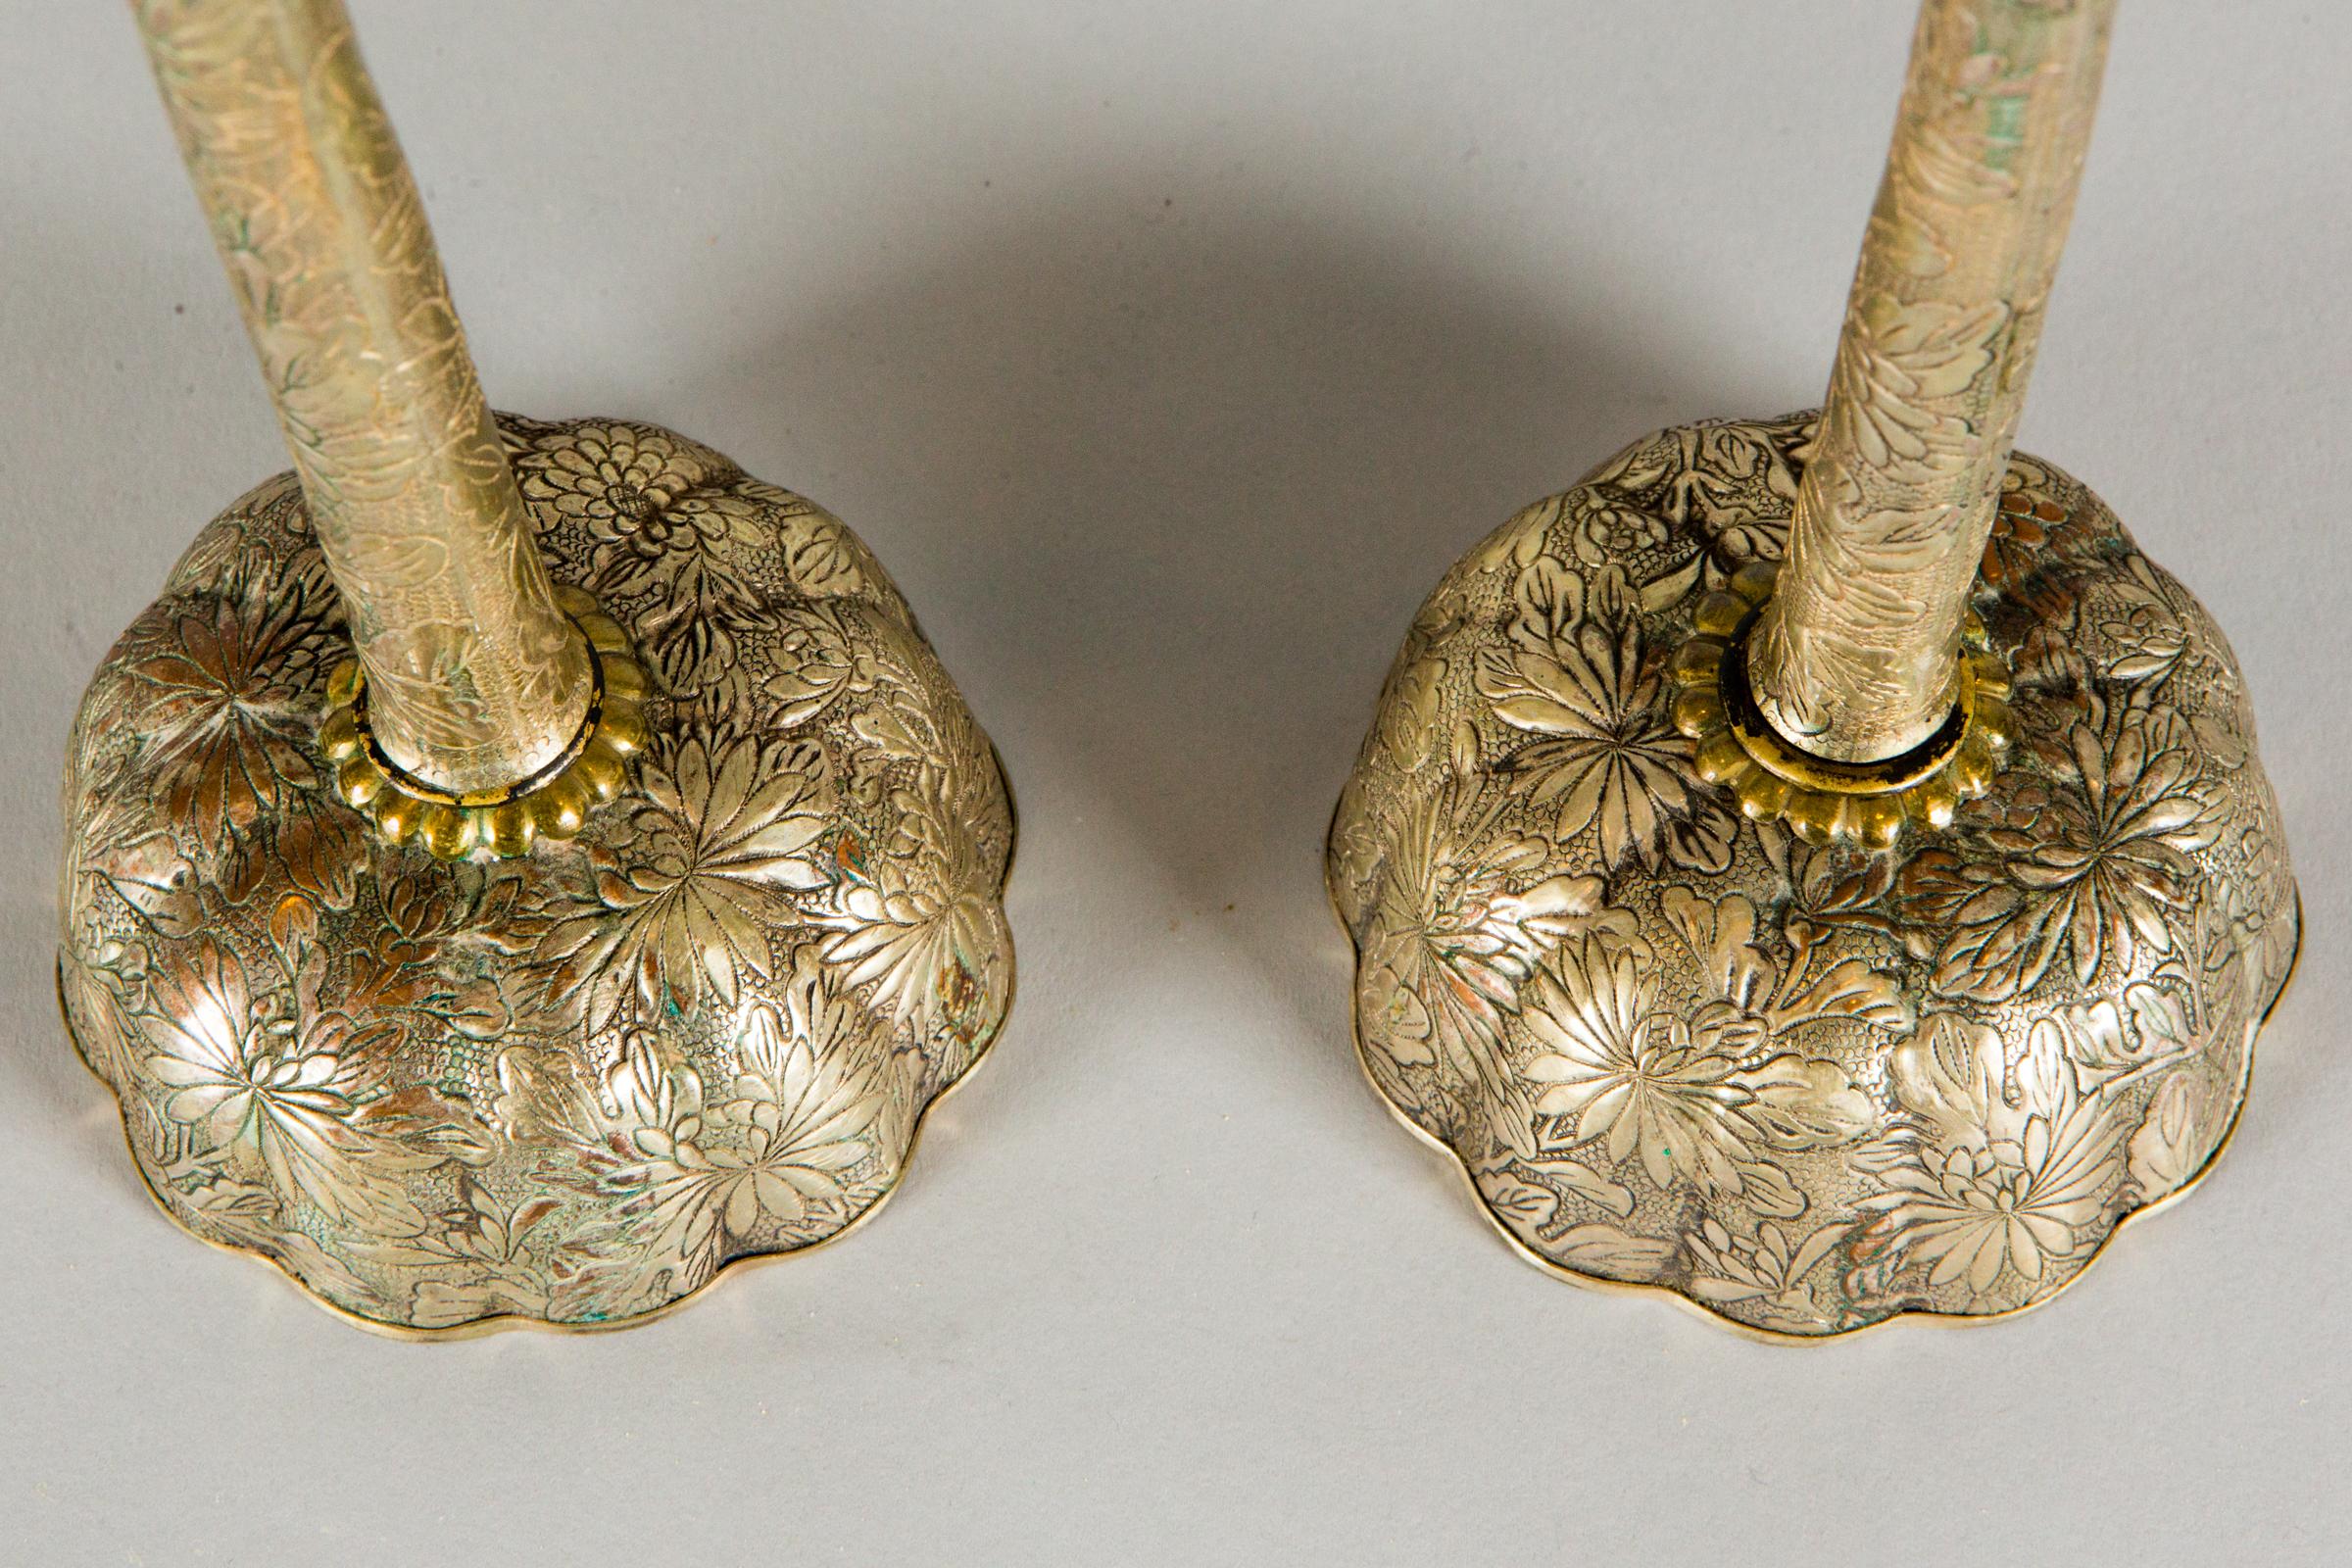 Pair of Antique Japanese Candlesticks, Meiji period (1868 - 1912) miniature candlesticks made of silver plated copper with an incised kiku (chrysanthemum) design. Good condition, comes with its original double chambered box.